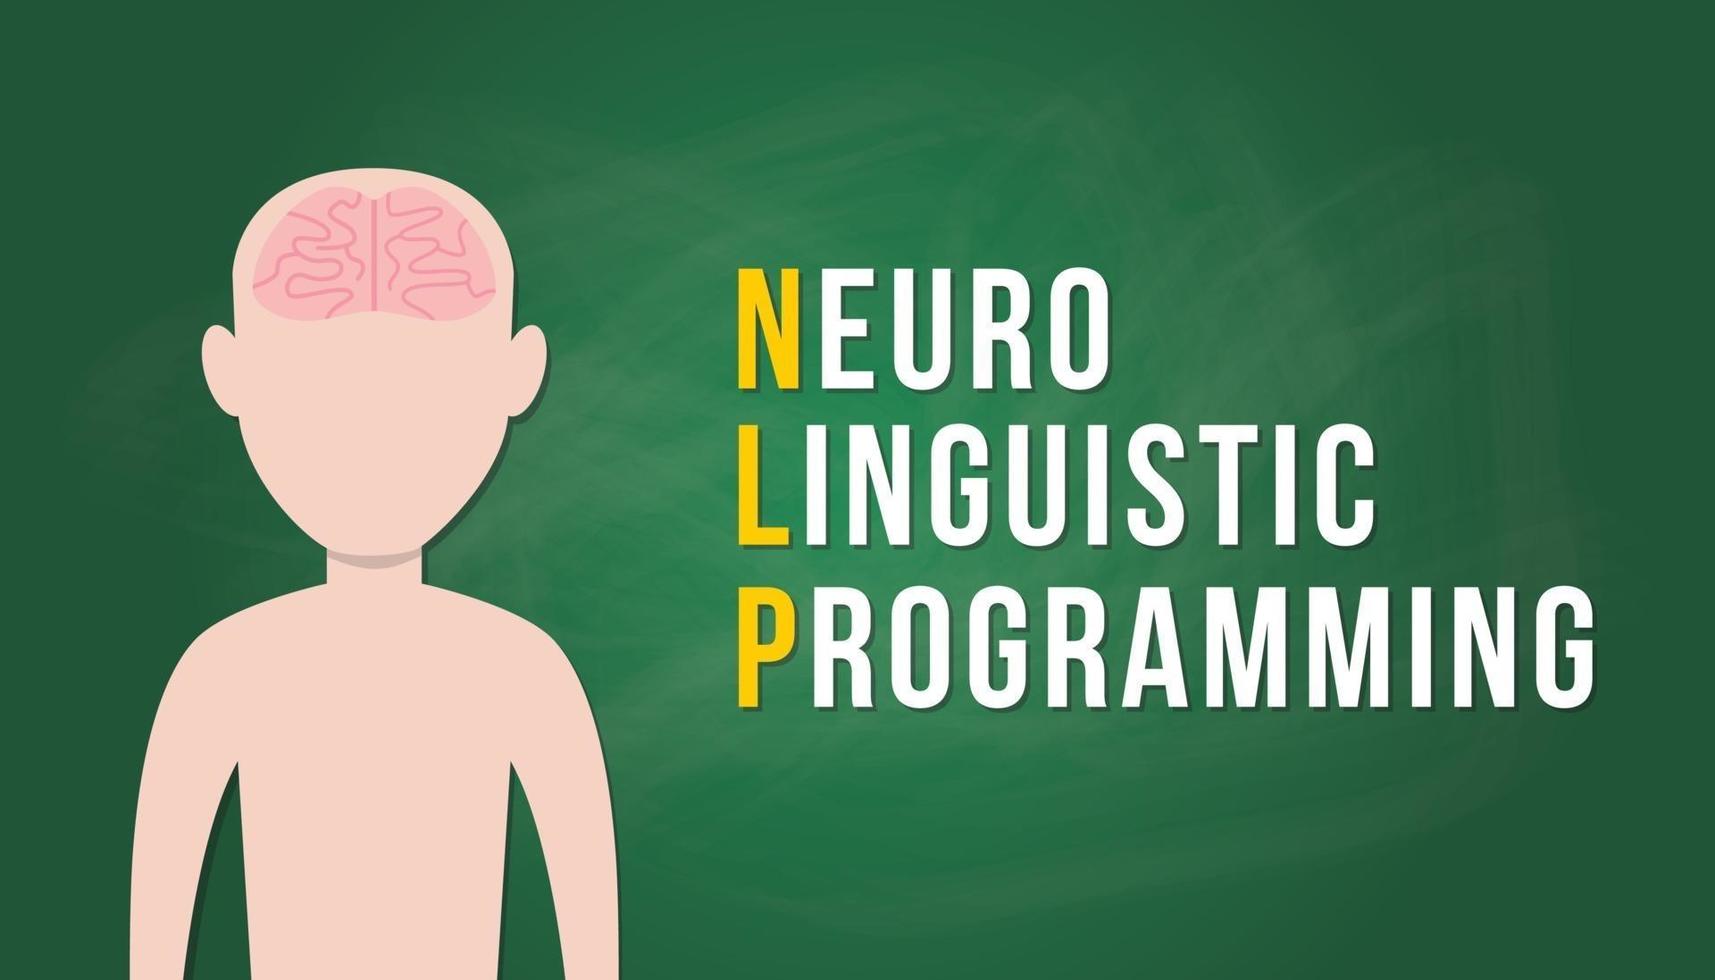 nlp neuro linguistic programming concept with human head people with brain and text banner - vector